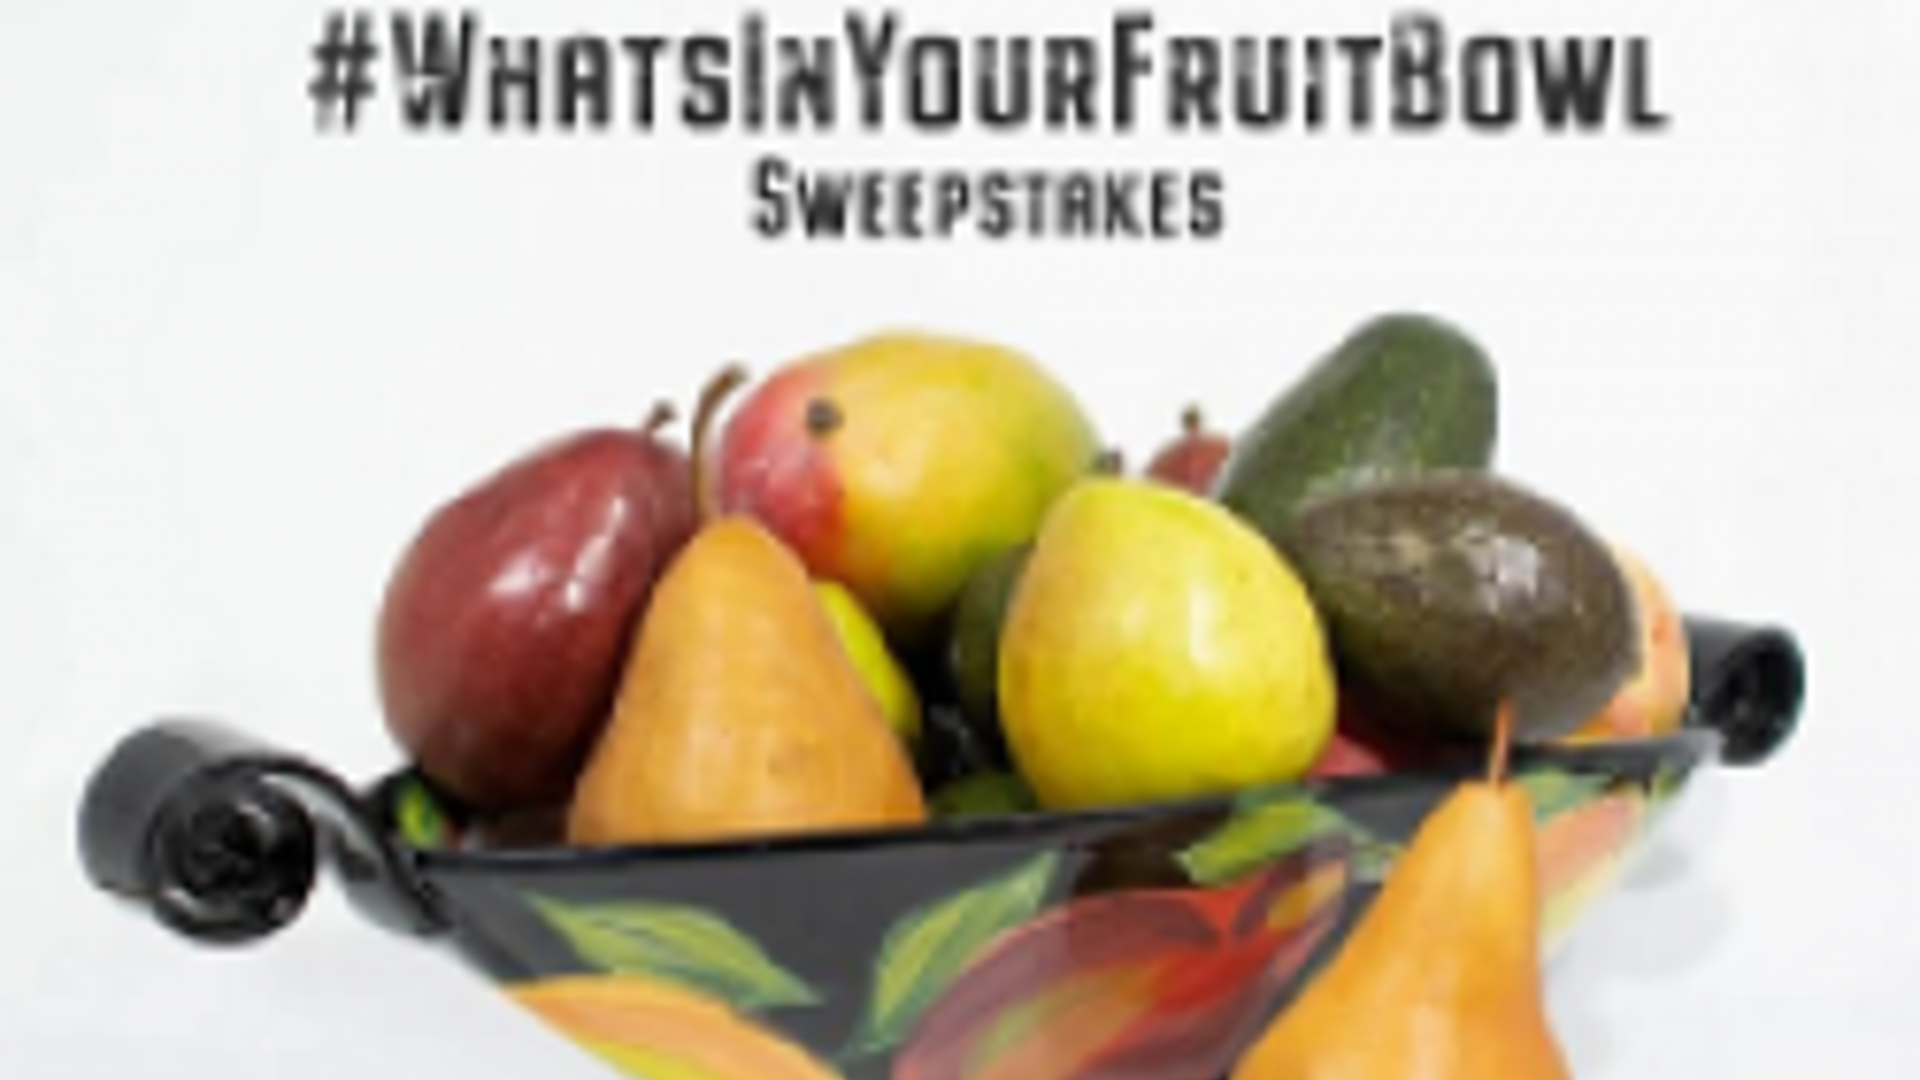 What's In Your Fruit Bowl Sweepstakes Pt 1